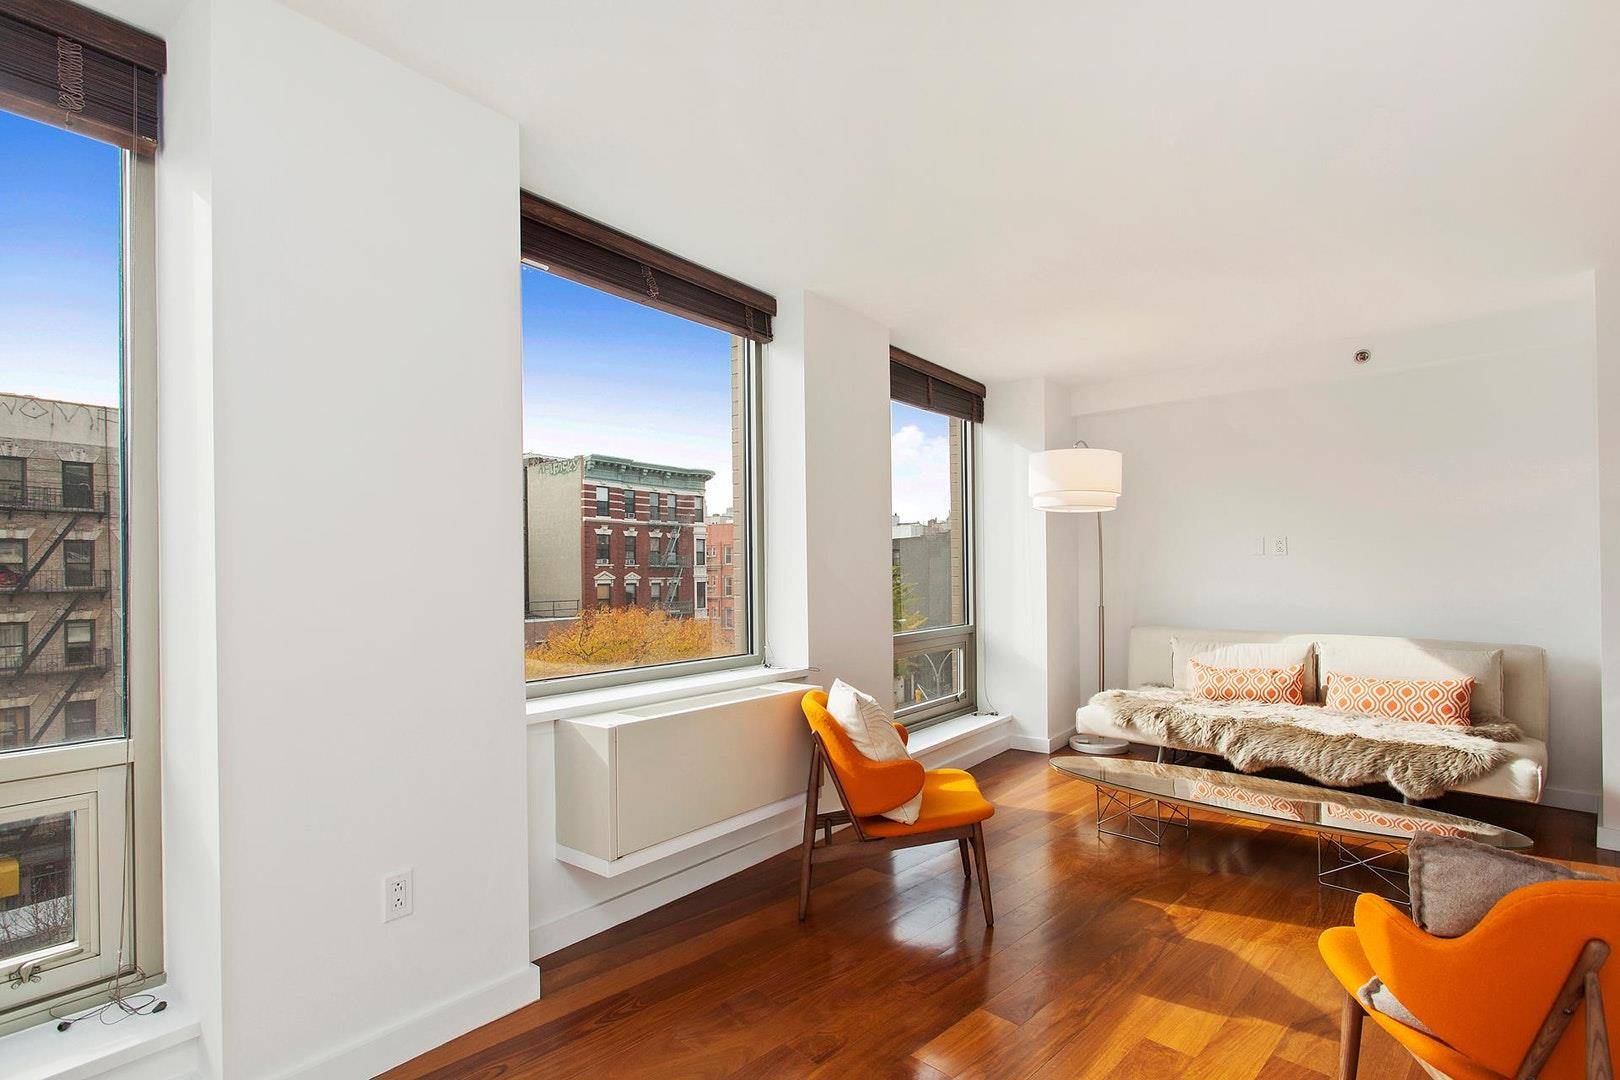 Enjoy open views of the East Village and Lower East Side from this 5th floor home.